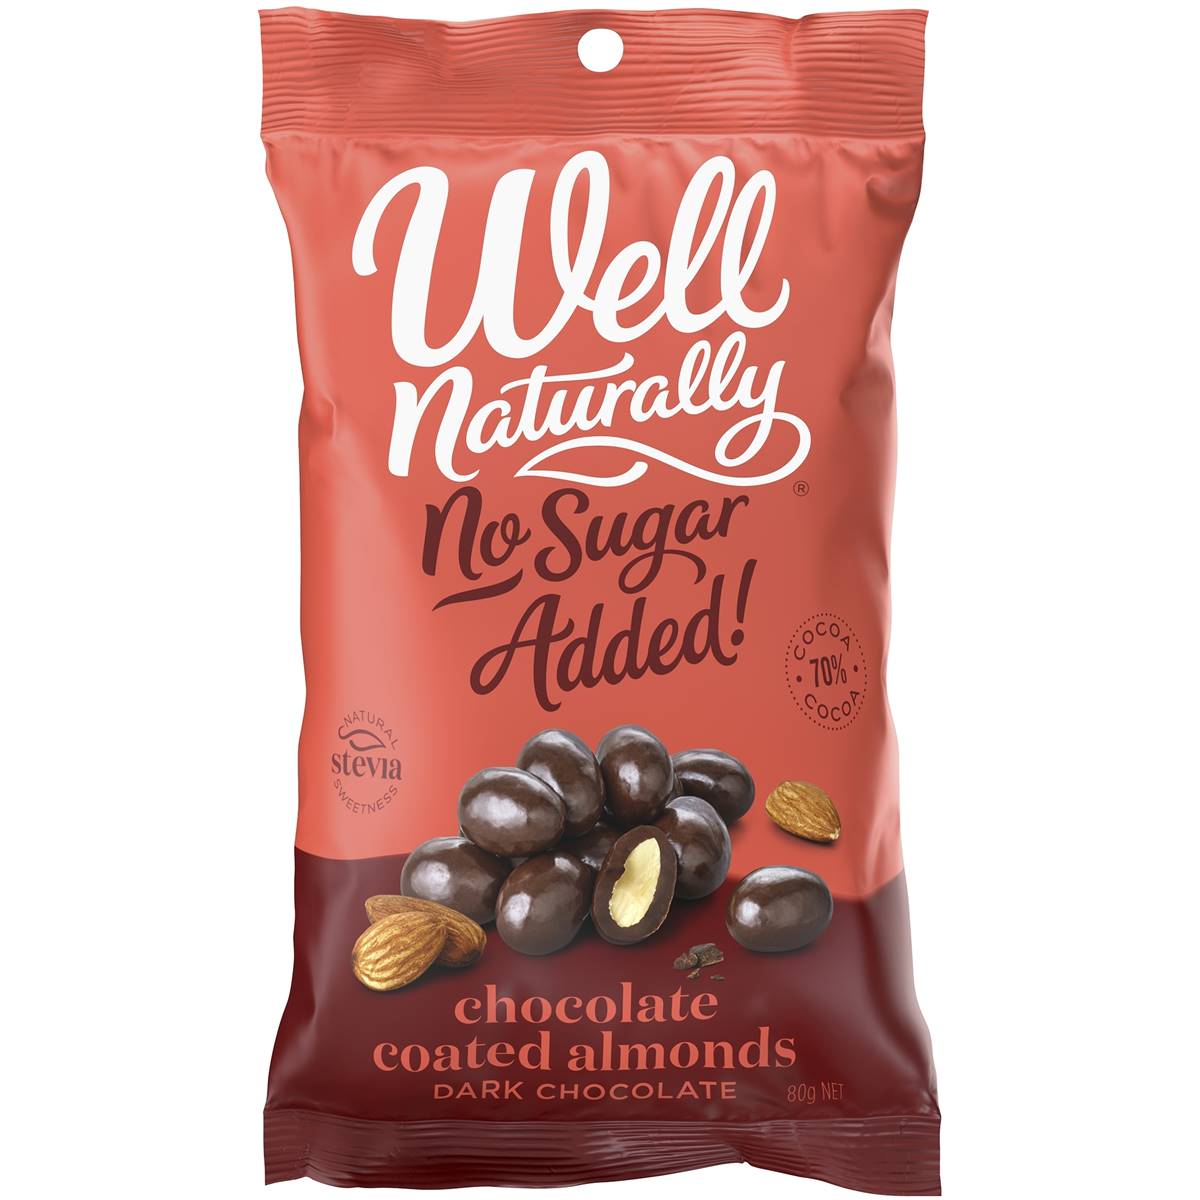 Calories in Well Naturally No Sugar Added Dark Chocolate Covered Almonds